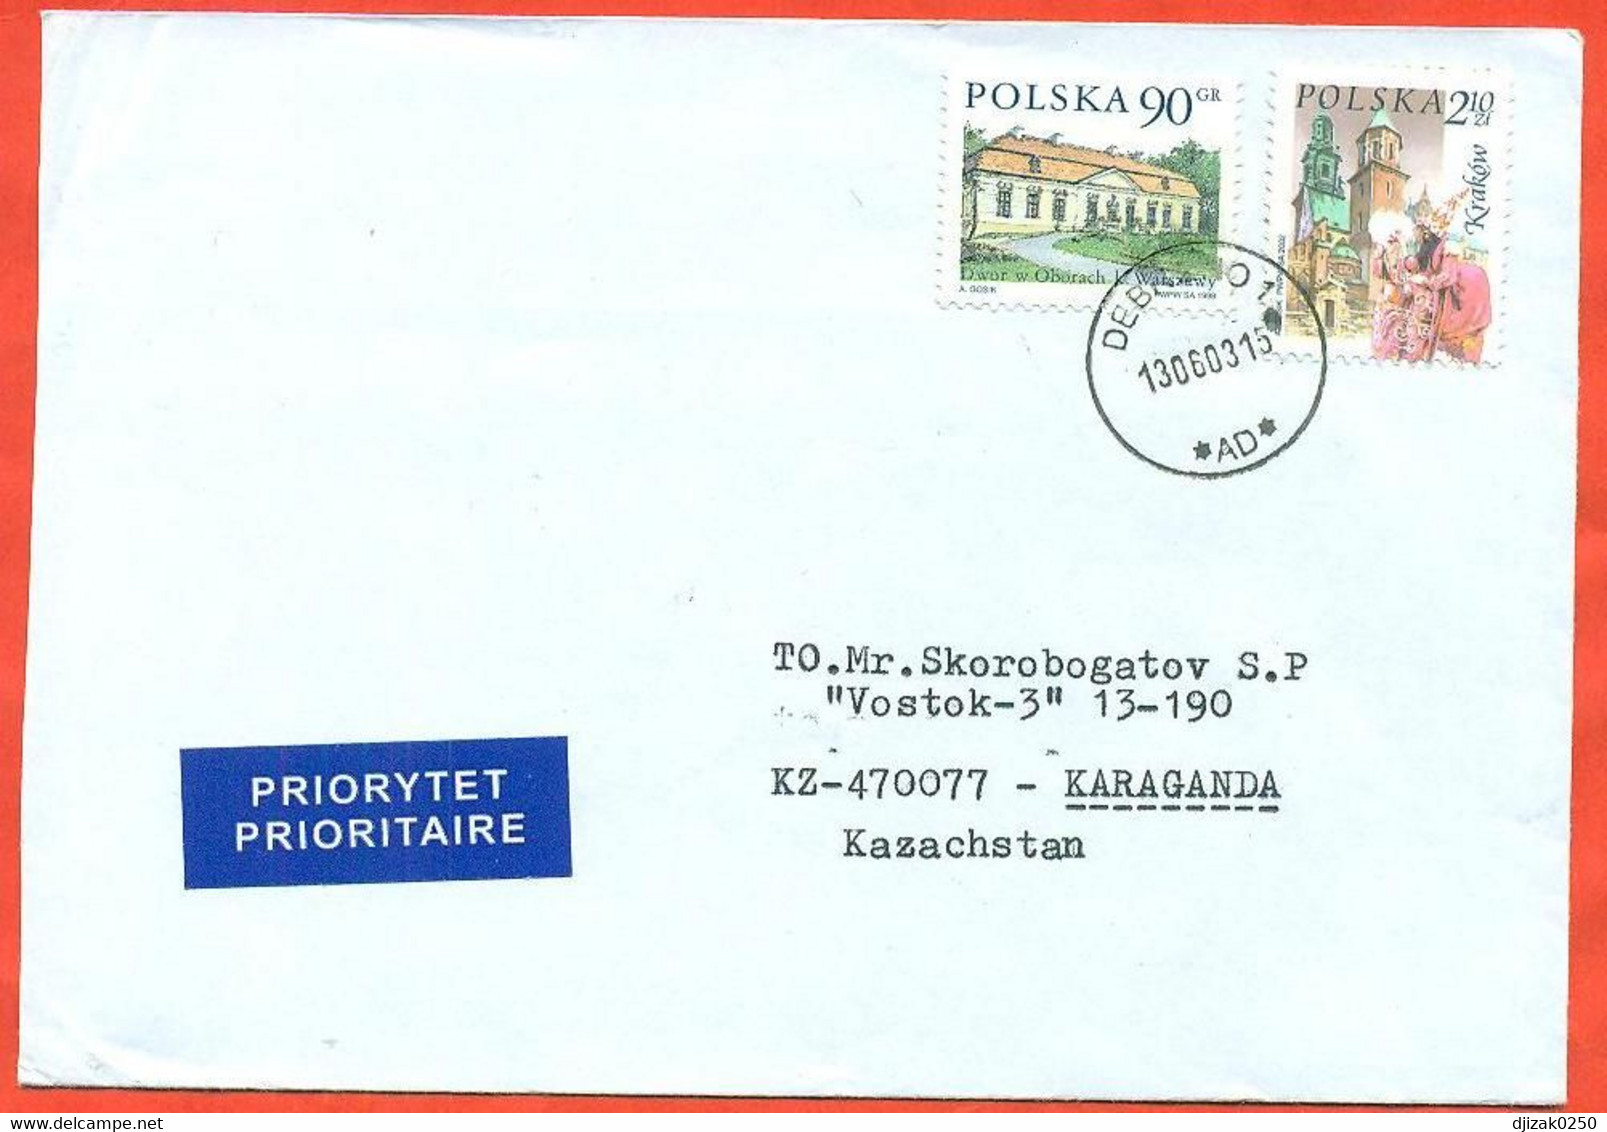 Poland 2003. The Envelope With  Passed Through The Mail. Airmail. - Cartas & Documentos